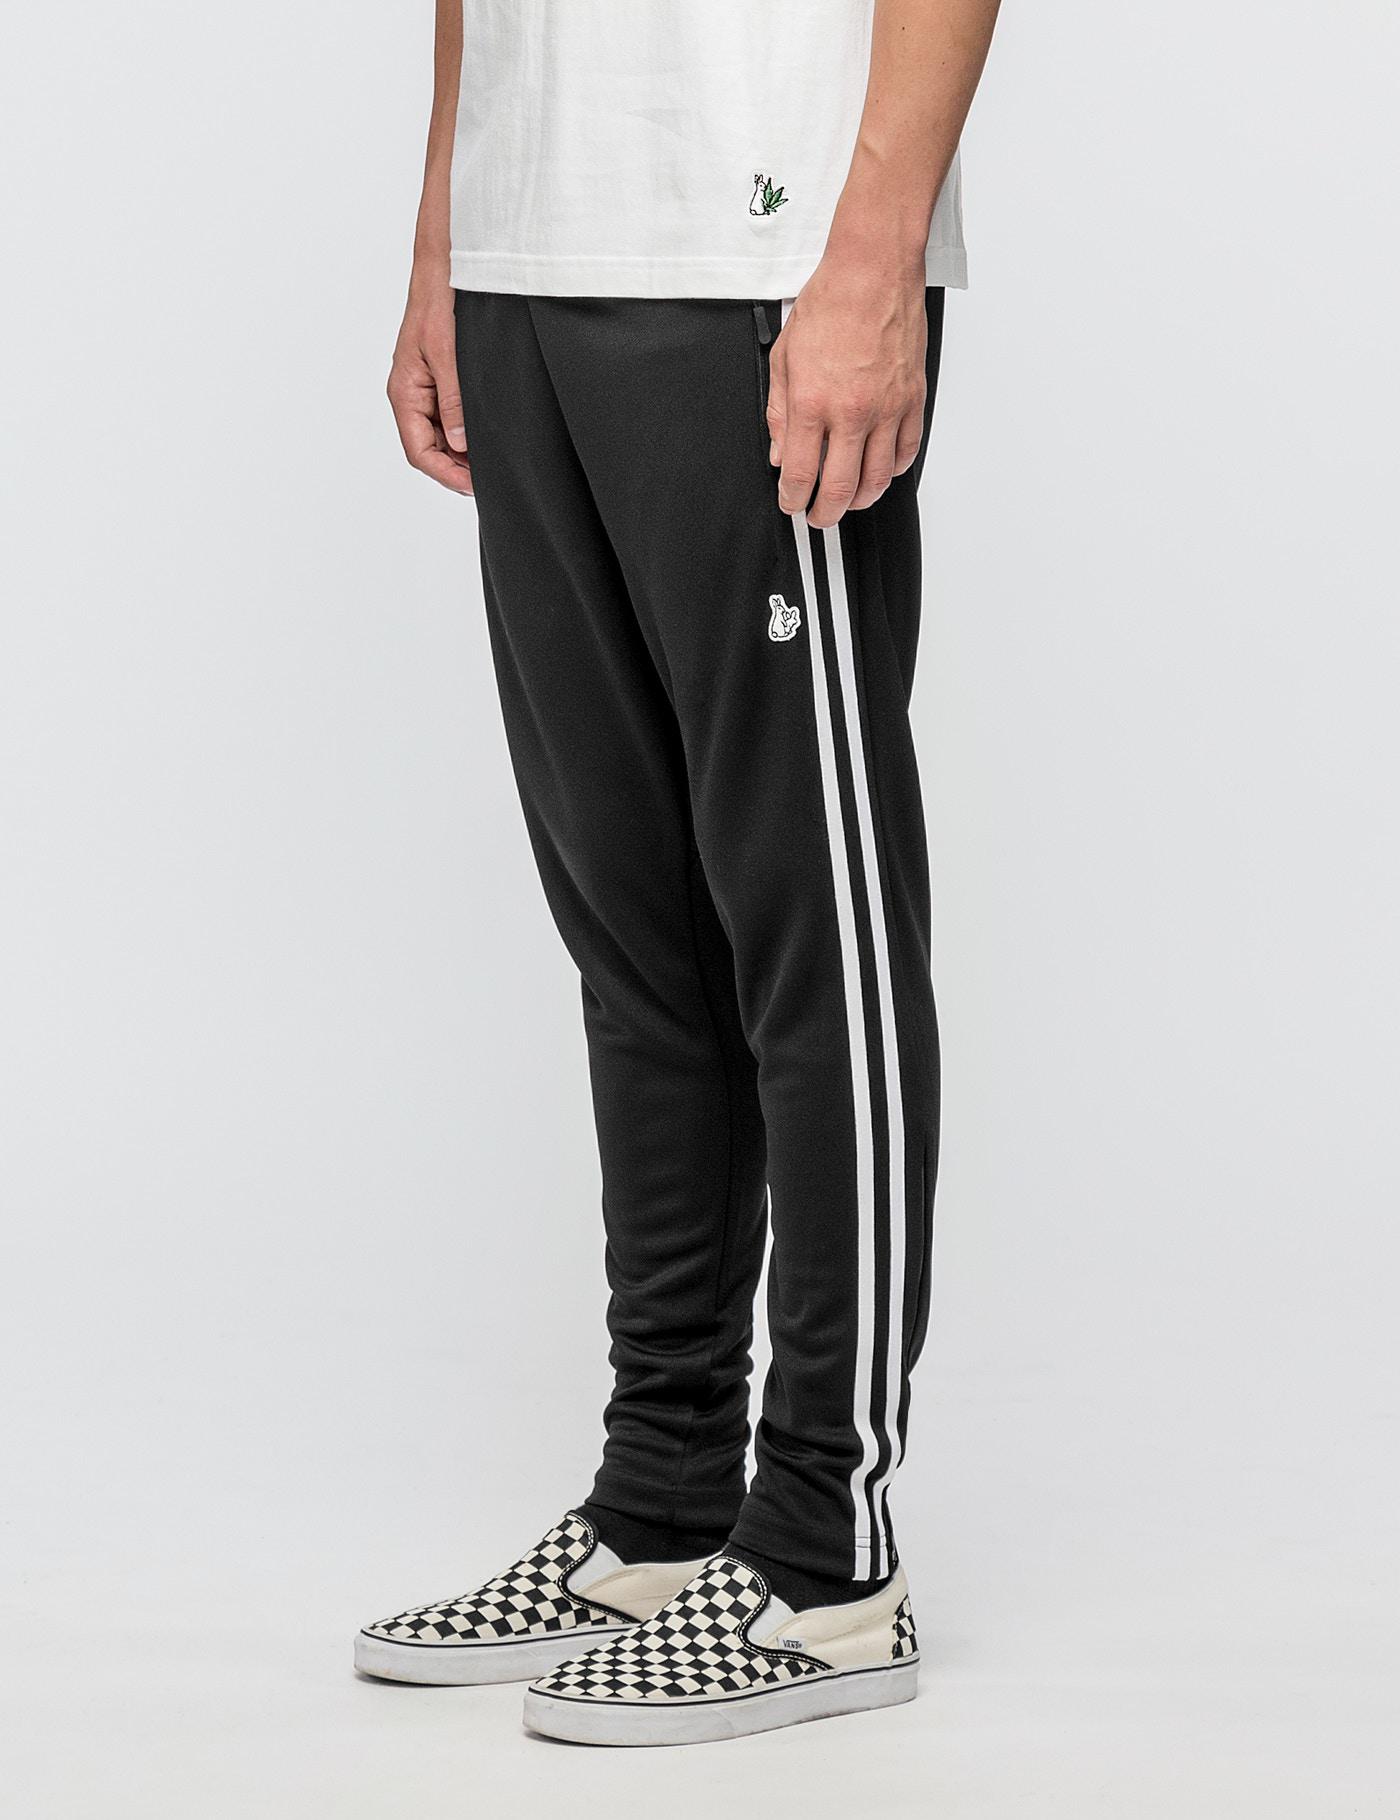 Fr2 Synthetic Hype Fit Track Pants In Black For Men Lyst